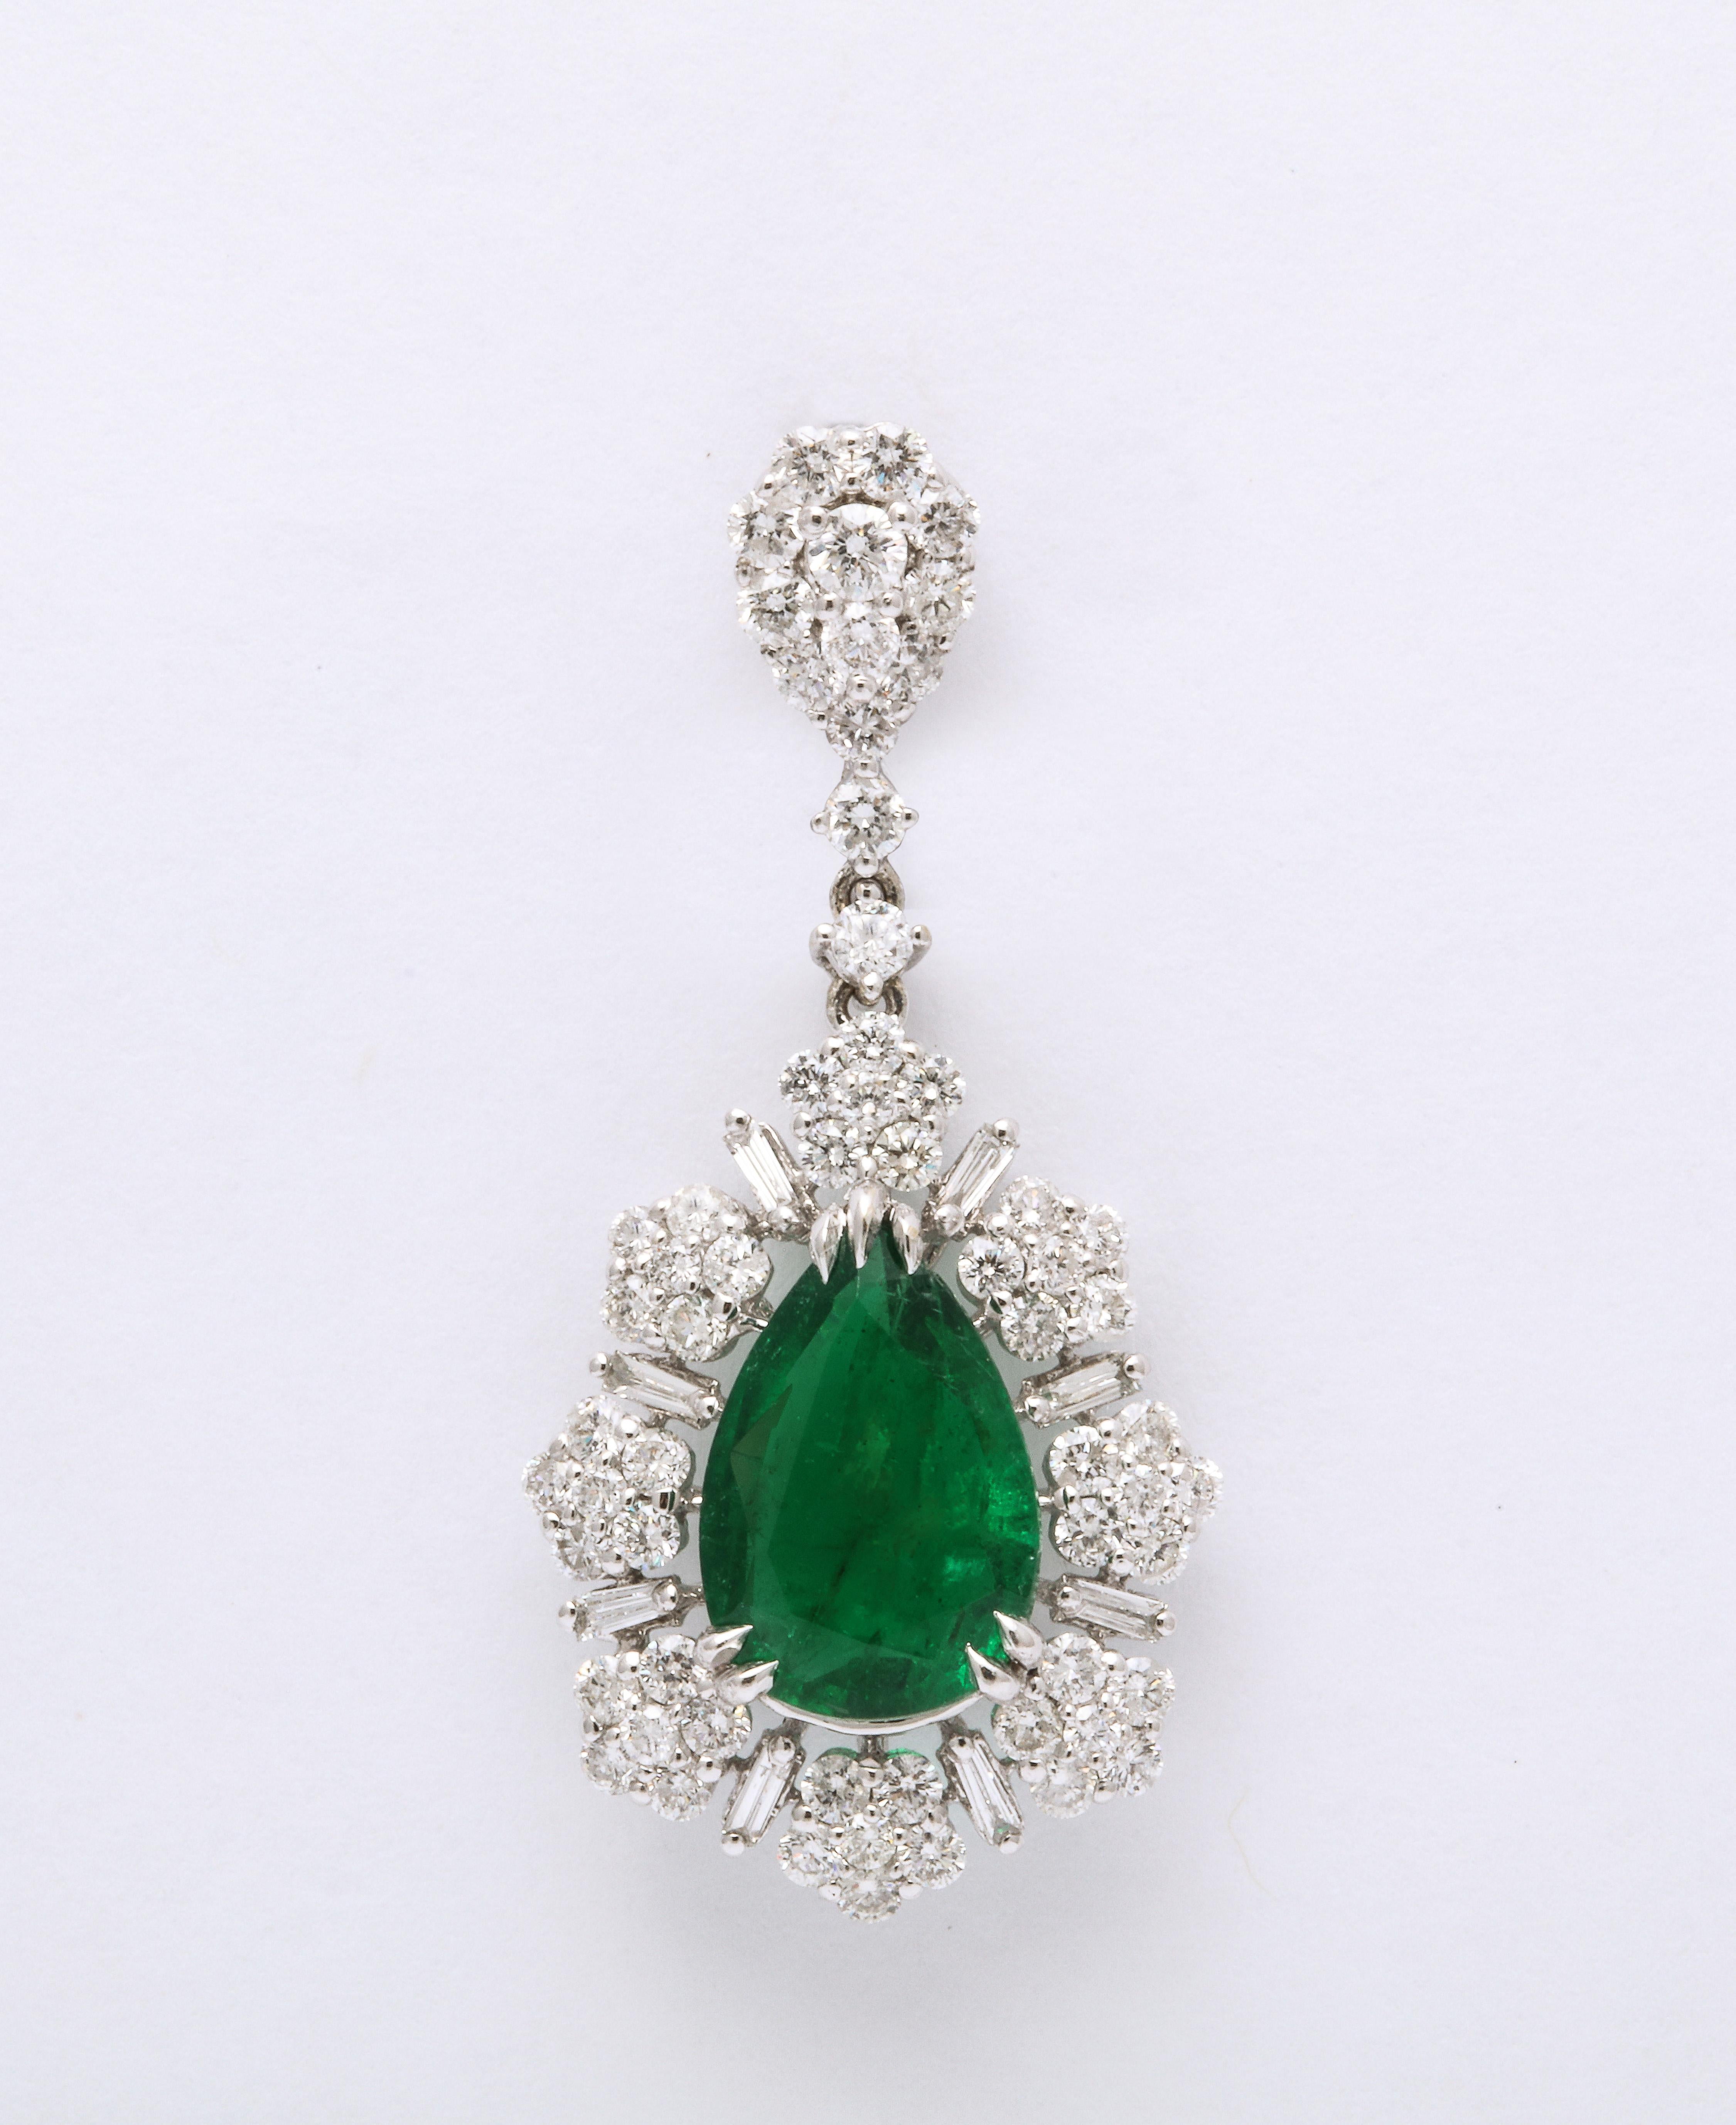 
3.81 carats of Fine Green Emerald

2.84 carats of white round brilliant and baguette cut diamonds. 

18k white gold 

1.4 inches long. 